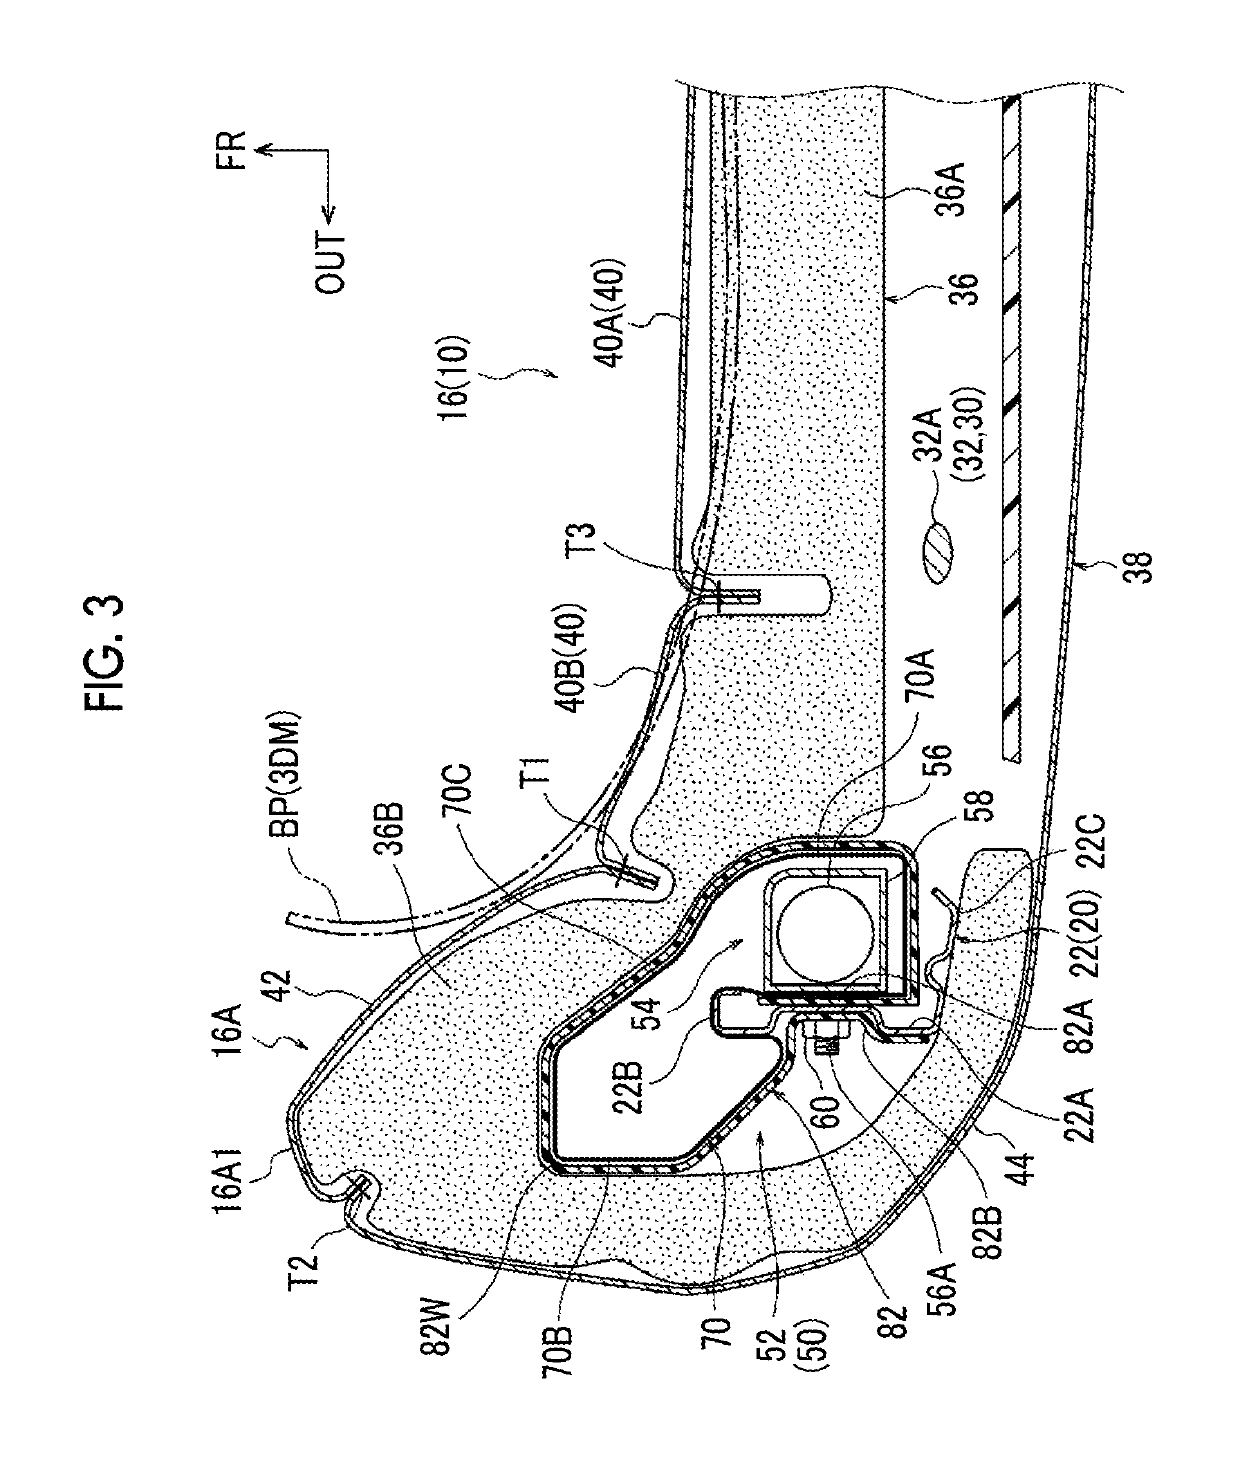 Vehicle seat with side airbag apparatus